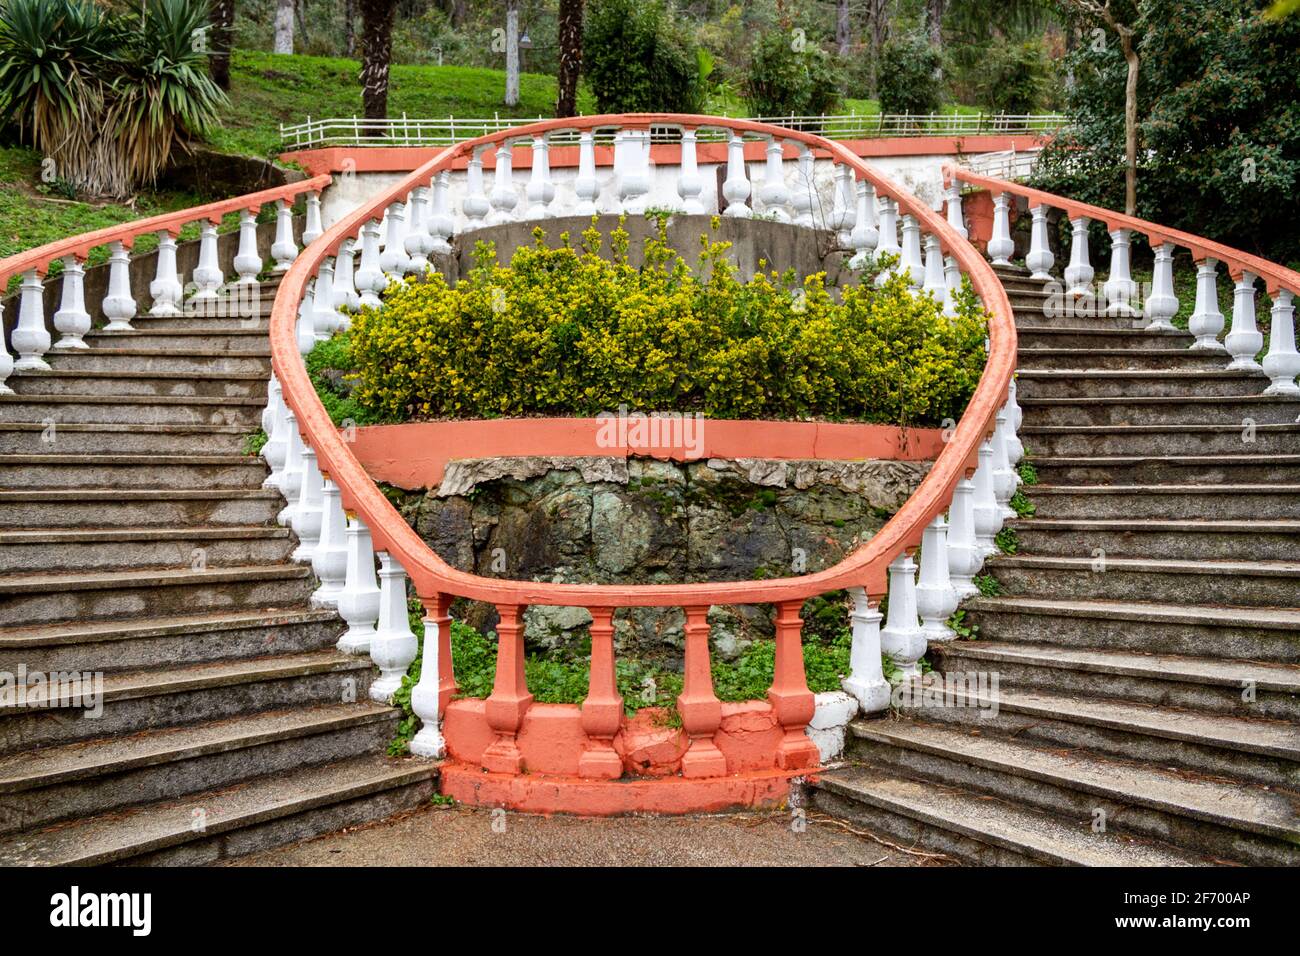 Oval, spiral shape outdoor staircase. Garden architecture Stock Photo